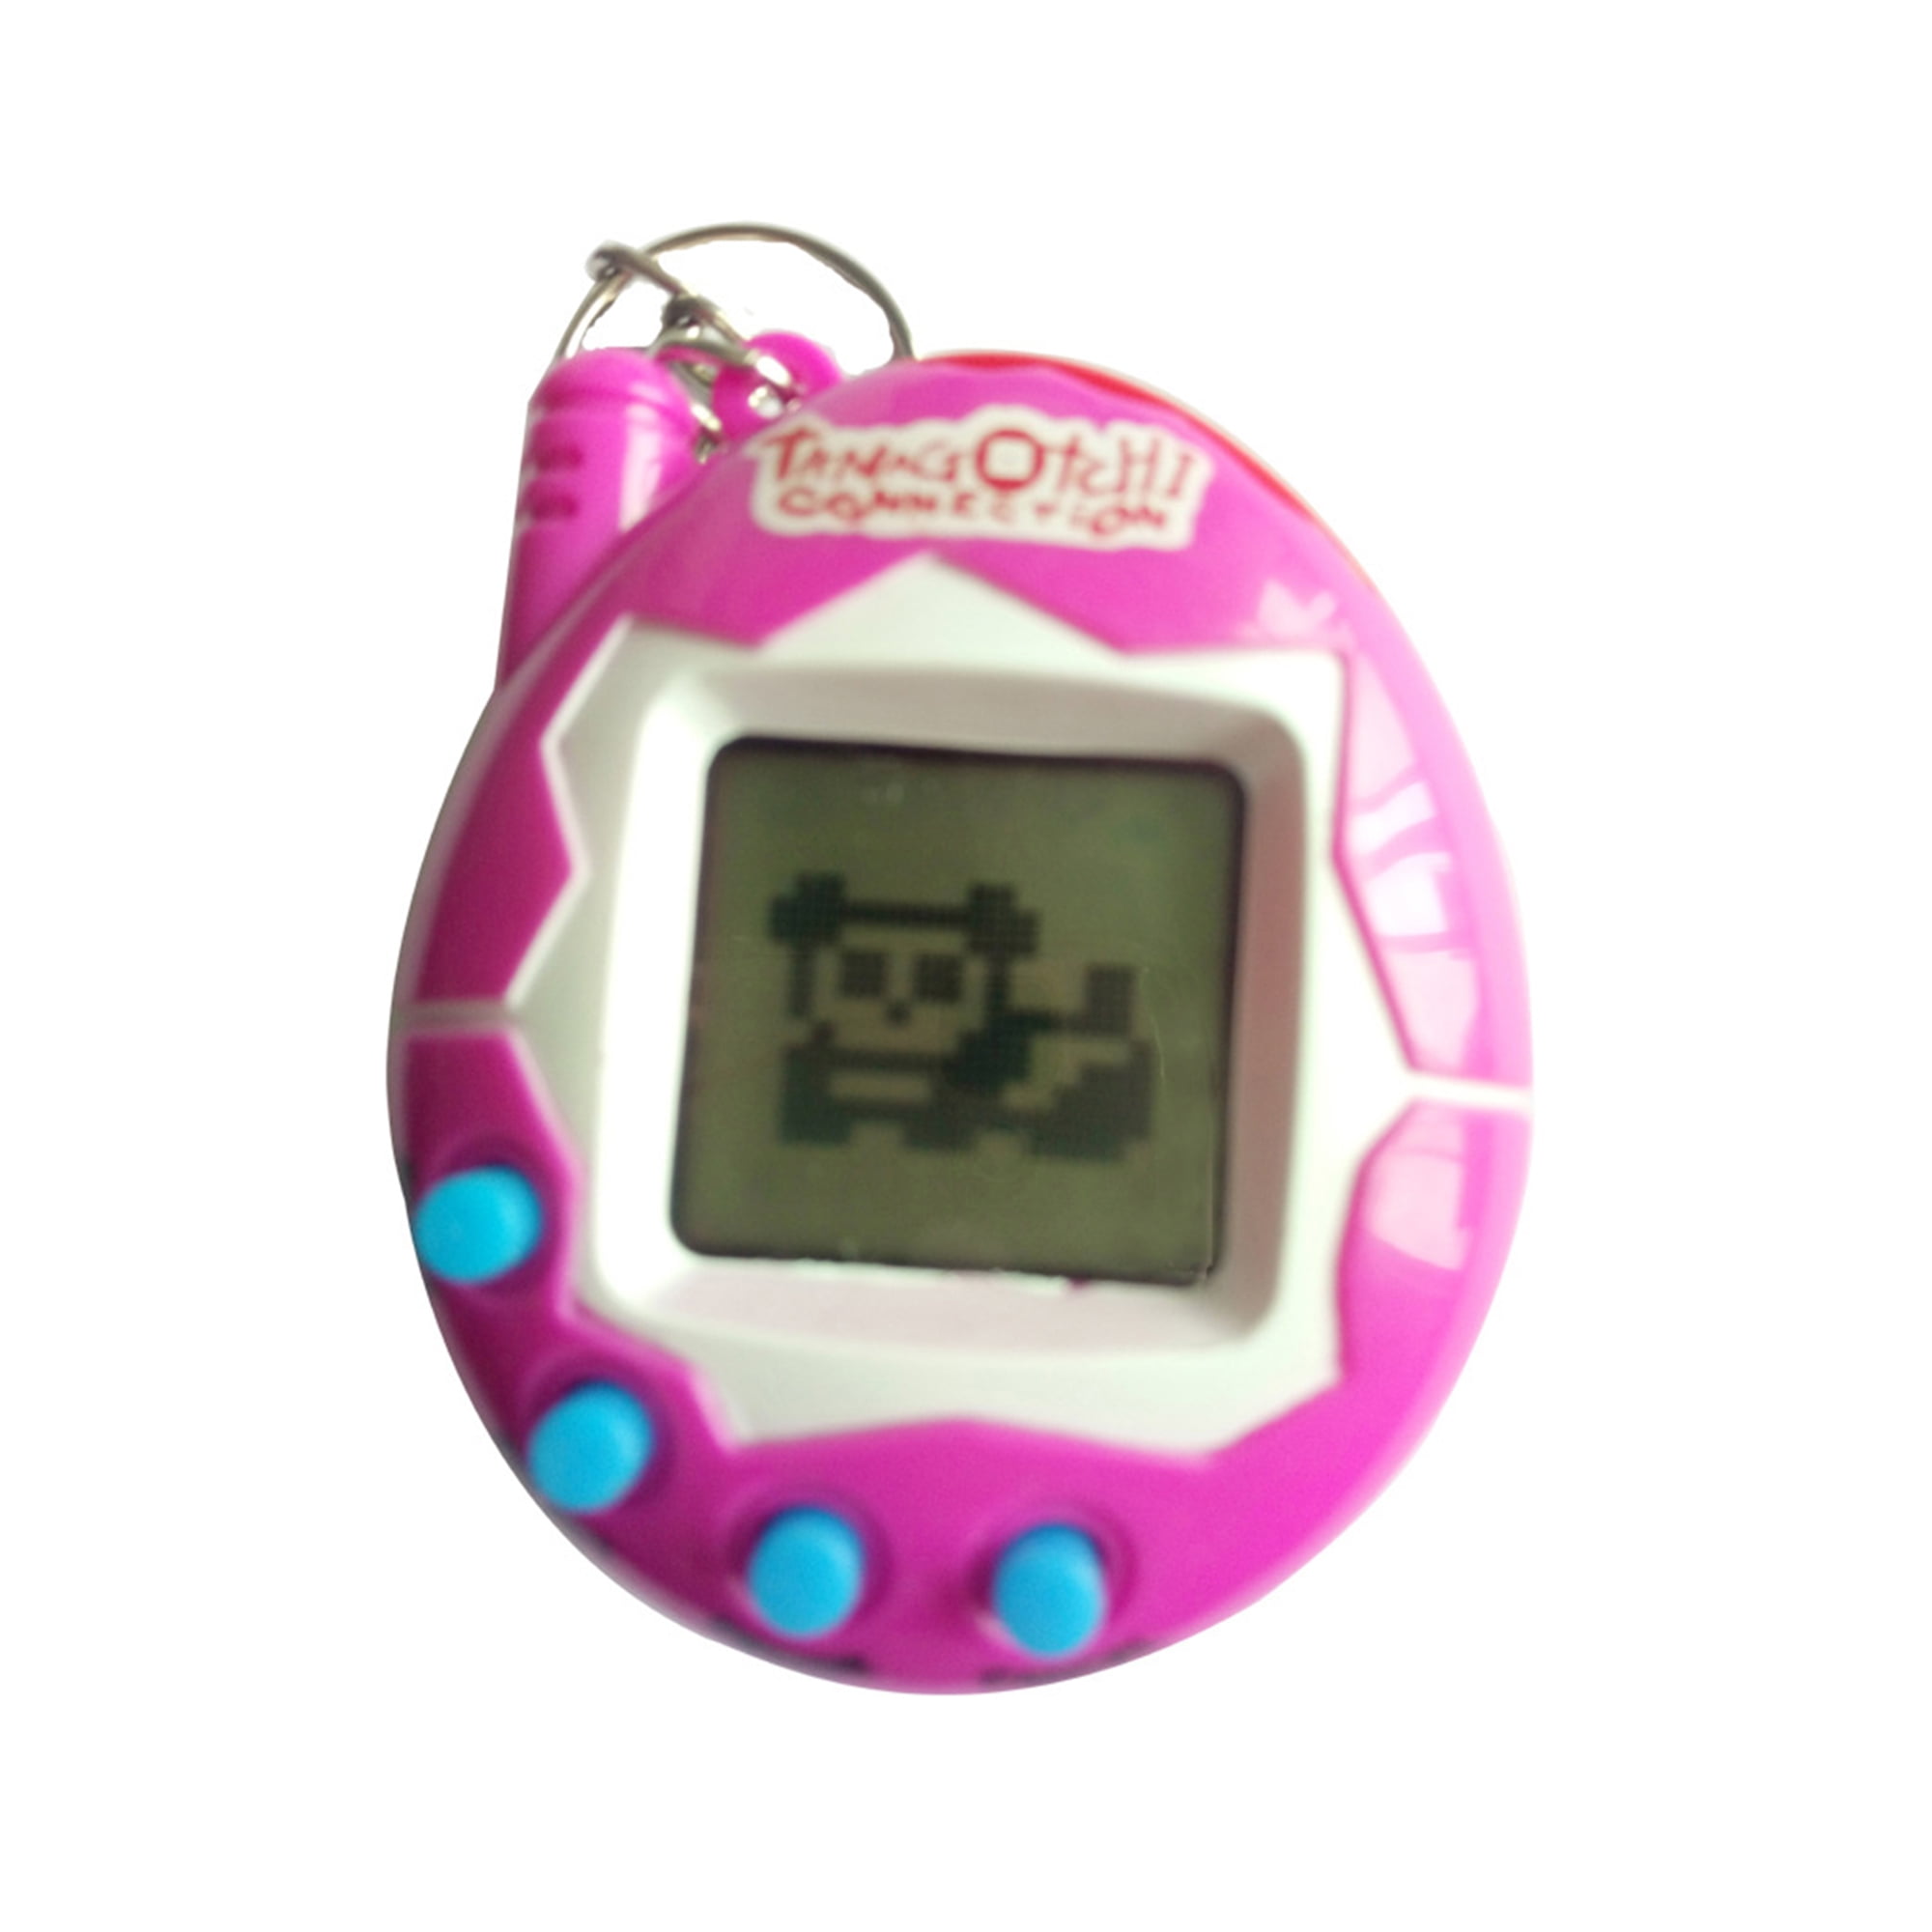 49 Pets in One Retro Virtual Pet Cyber Pet Toy Retro Kitty Dogs and Panda Other Animals for Kids Adults Electronic Digital Pet 